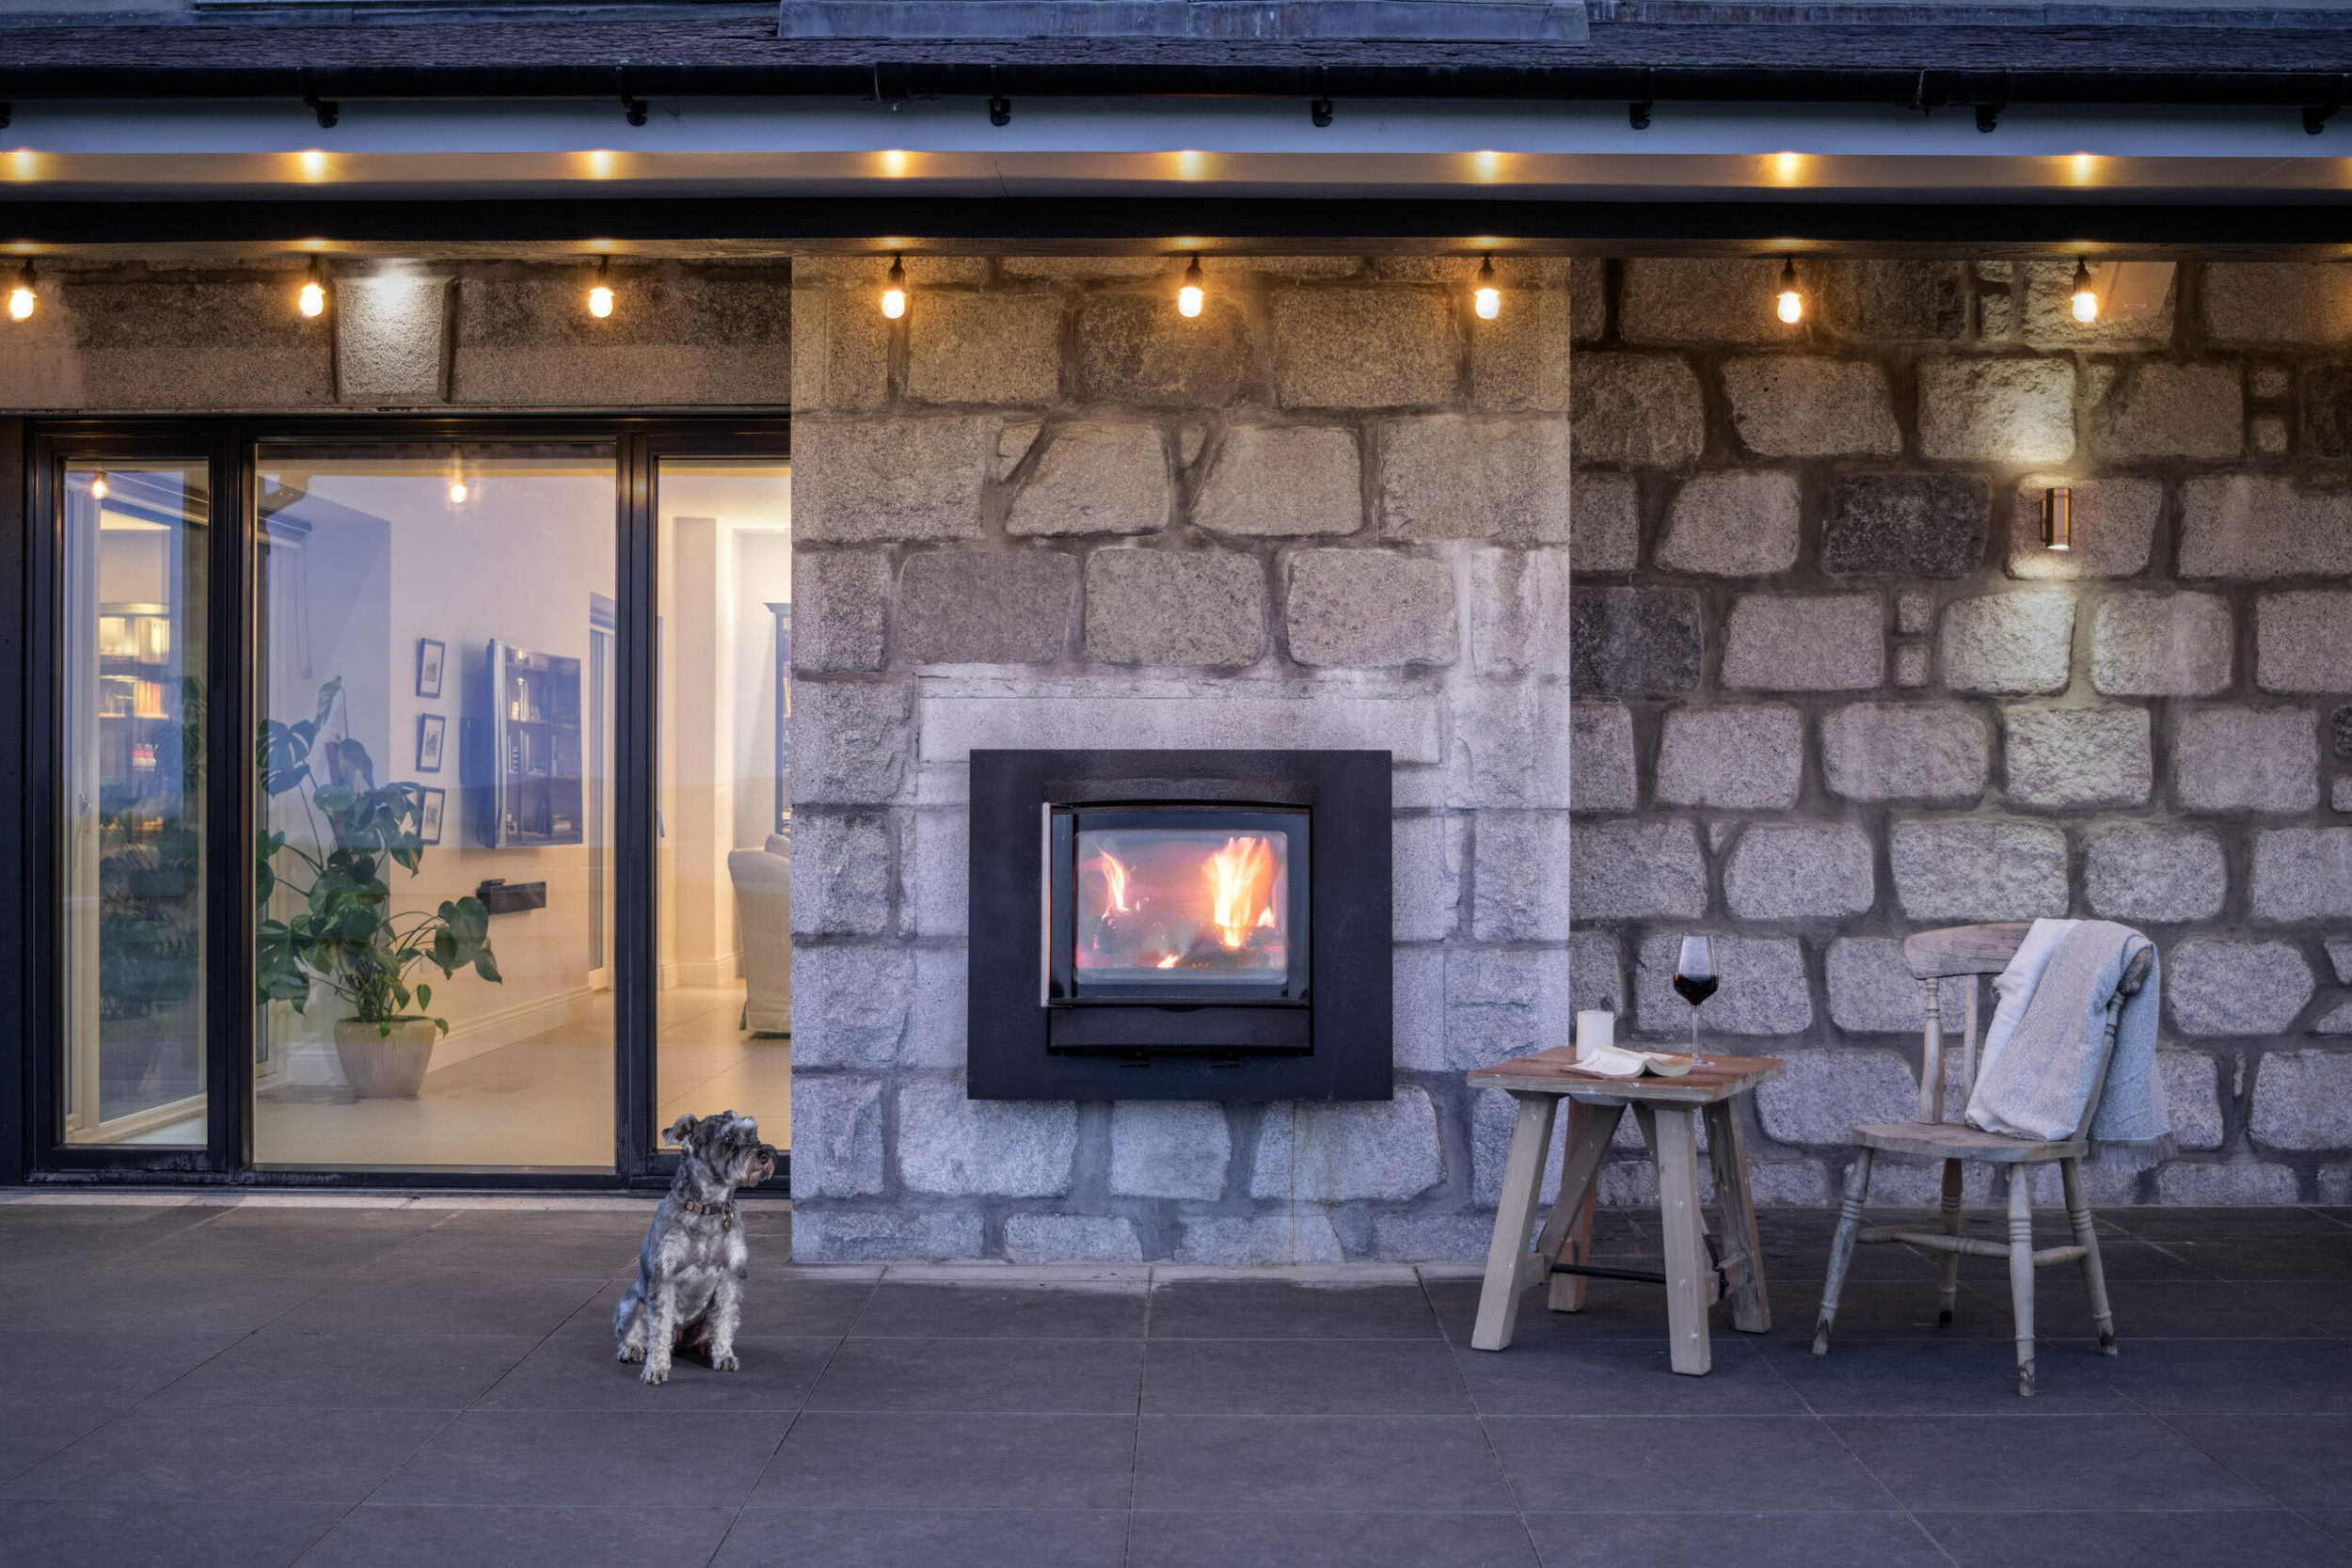 A built-in external fireplace burns outside a house as a dog watches on. The fireplace surround is grey granite stone. Party lights hang above the fireplace. A small wooden table and chair are next to the fire.